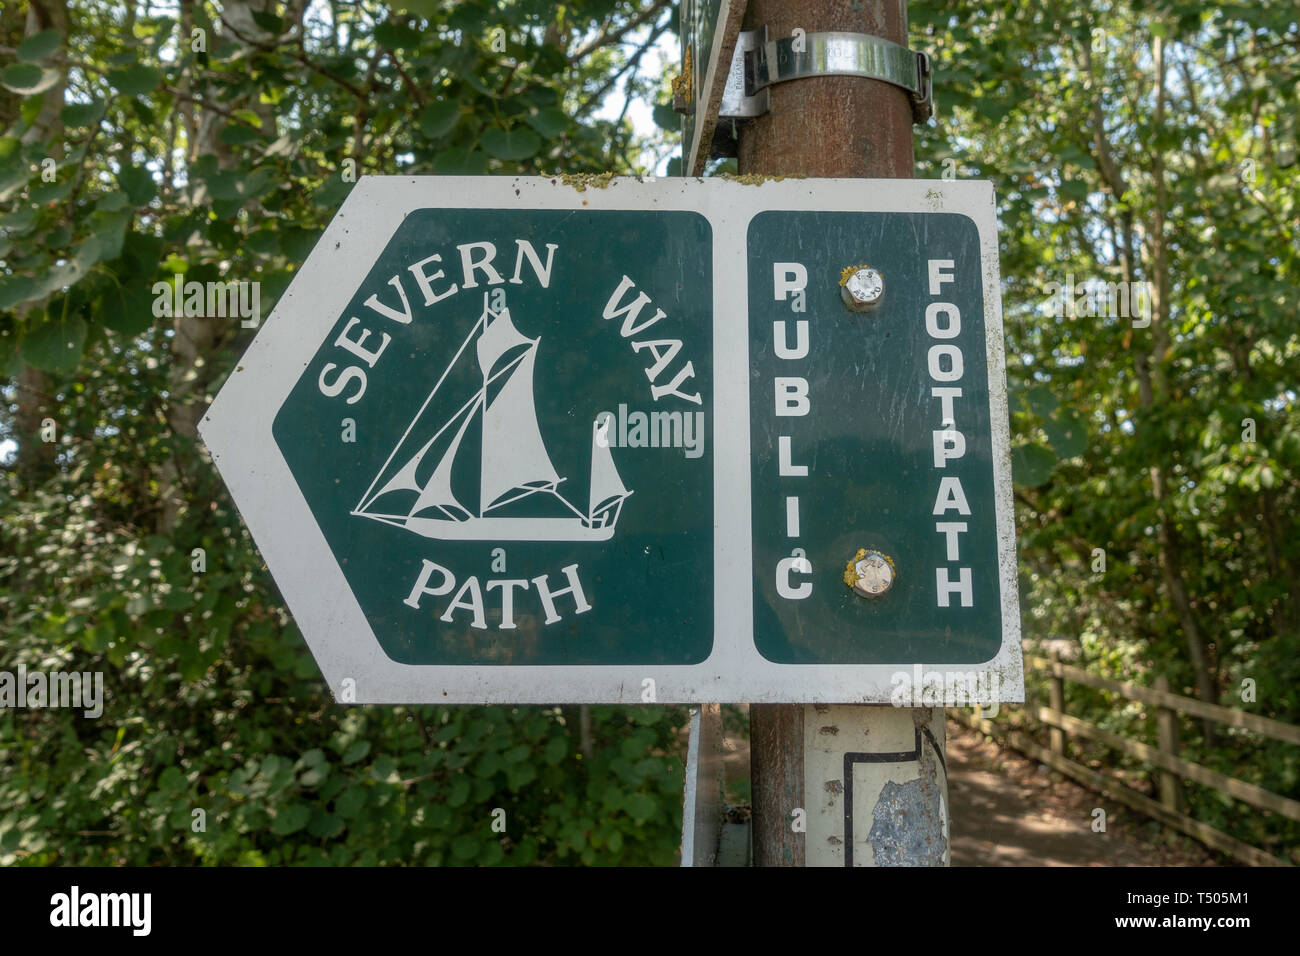 A Severn Way Path public footpath close to the the M48 motorway near the Severn Bridge, England. Stock Photo